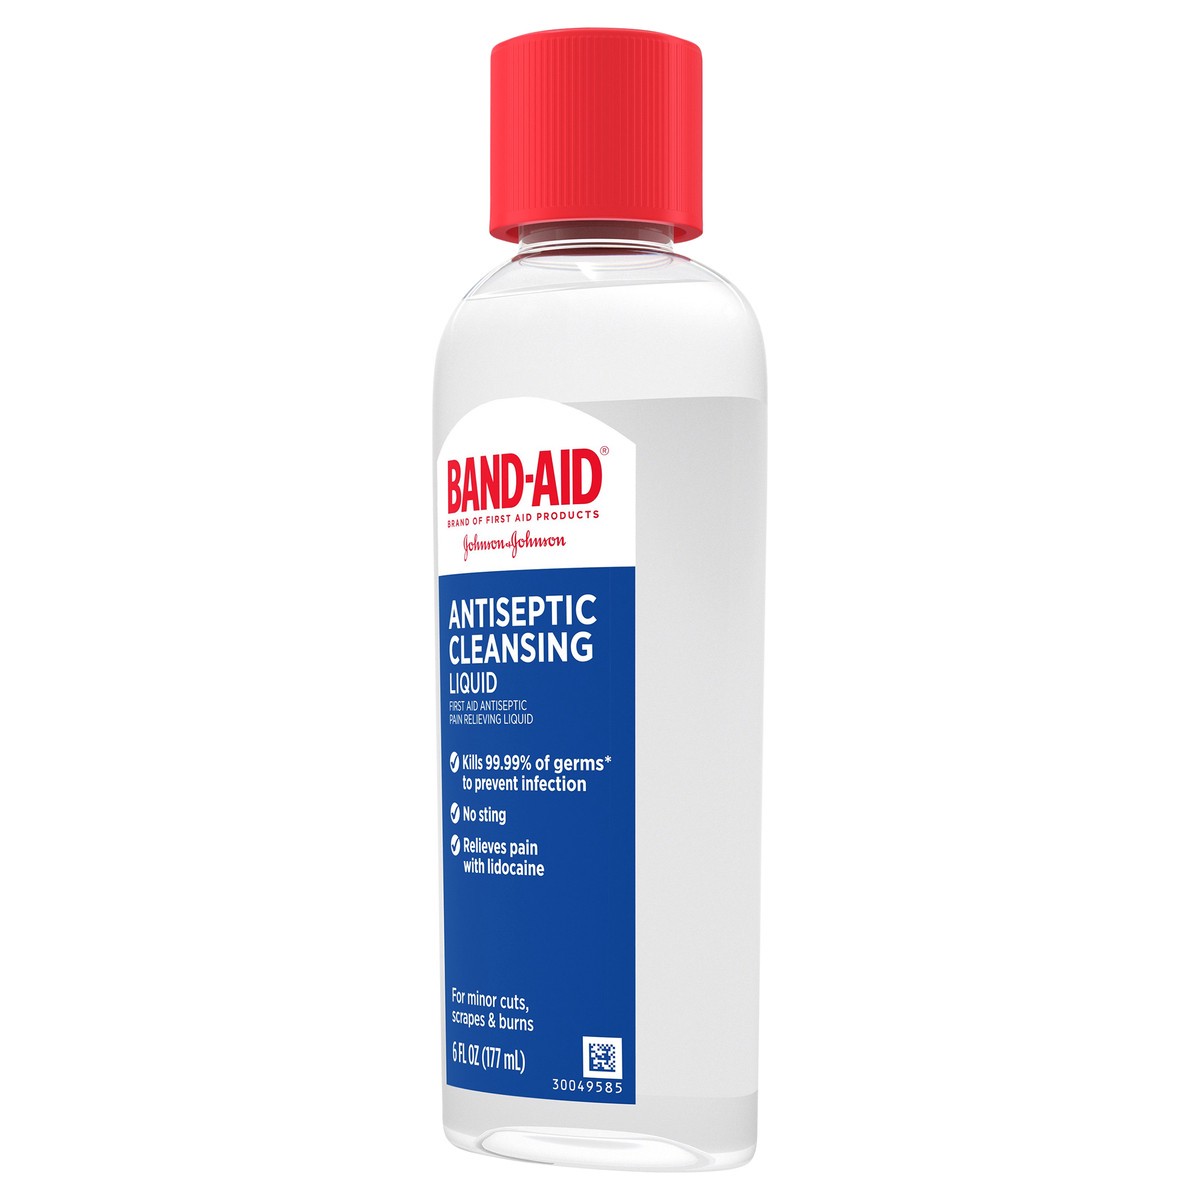 slide 4 of 7, BAND-AID Antiseptic Cleansing Liquid, First Aid Antiseptic Wash Relieves Pain & Kills Germs, with Benzalkonium Cl Wound Antiseptic & Lidocaine HCl Topical Analgesic, 6 fl. oz, 6 fl oz